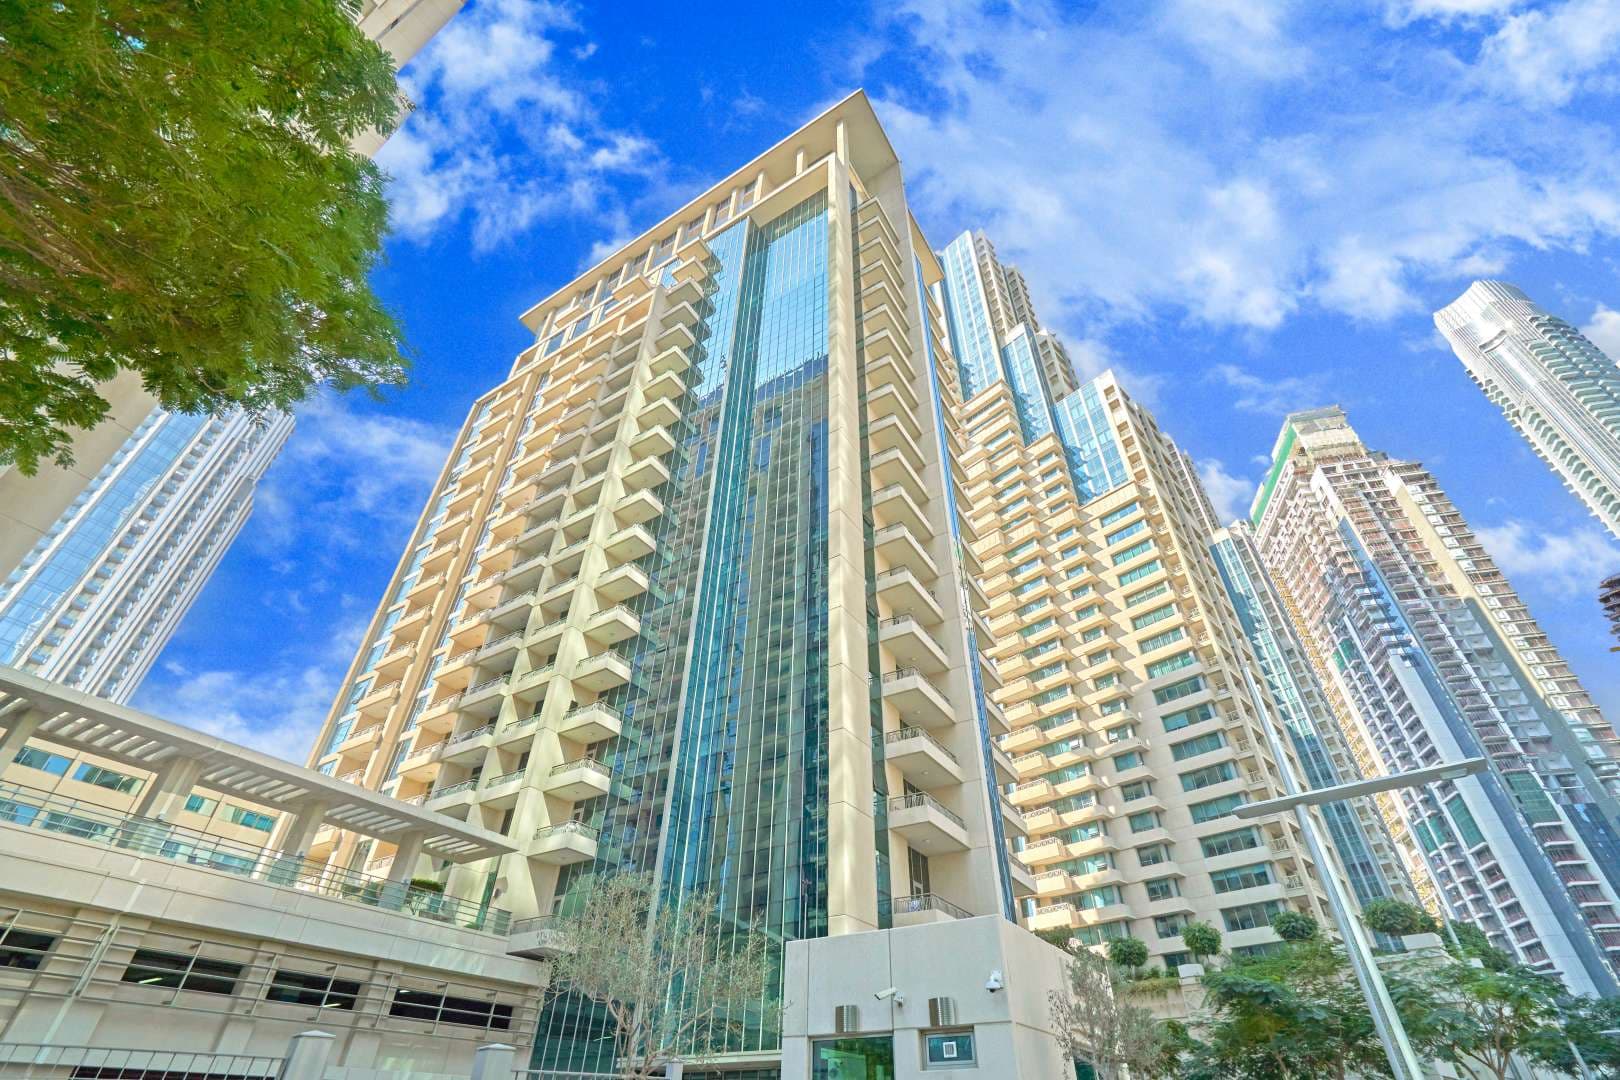 1 Bedroom Apartment For Sale Boulevard Central Towers Lp08957 232958dd60400e00.jpg